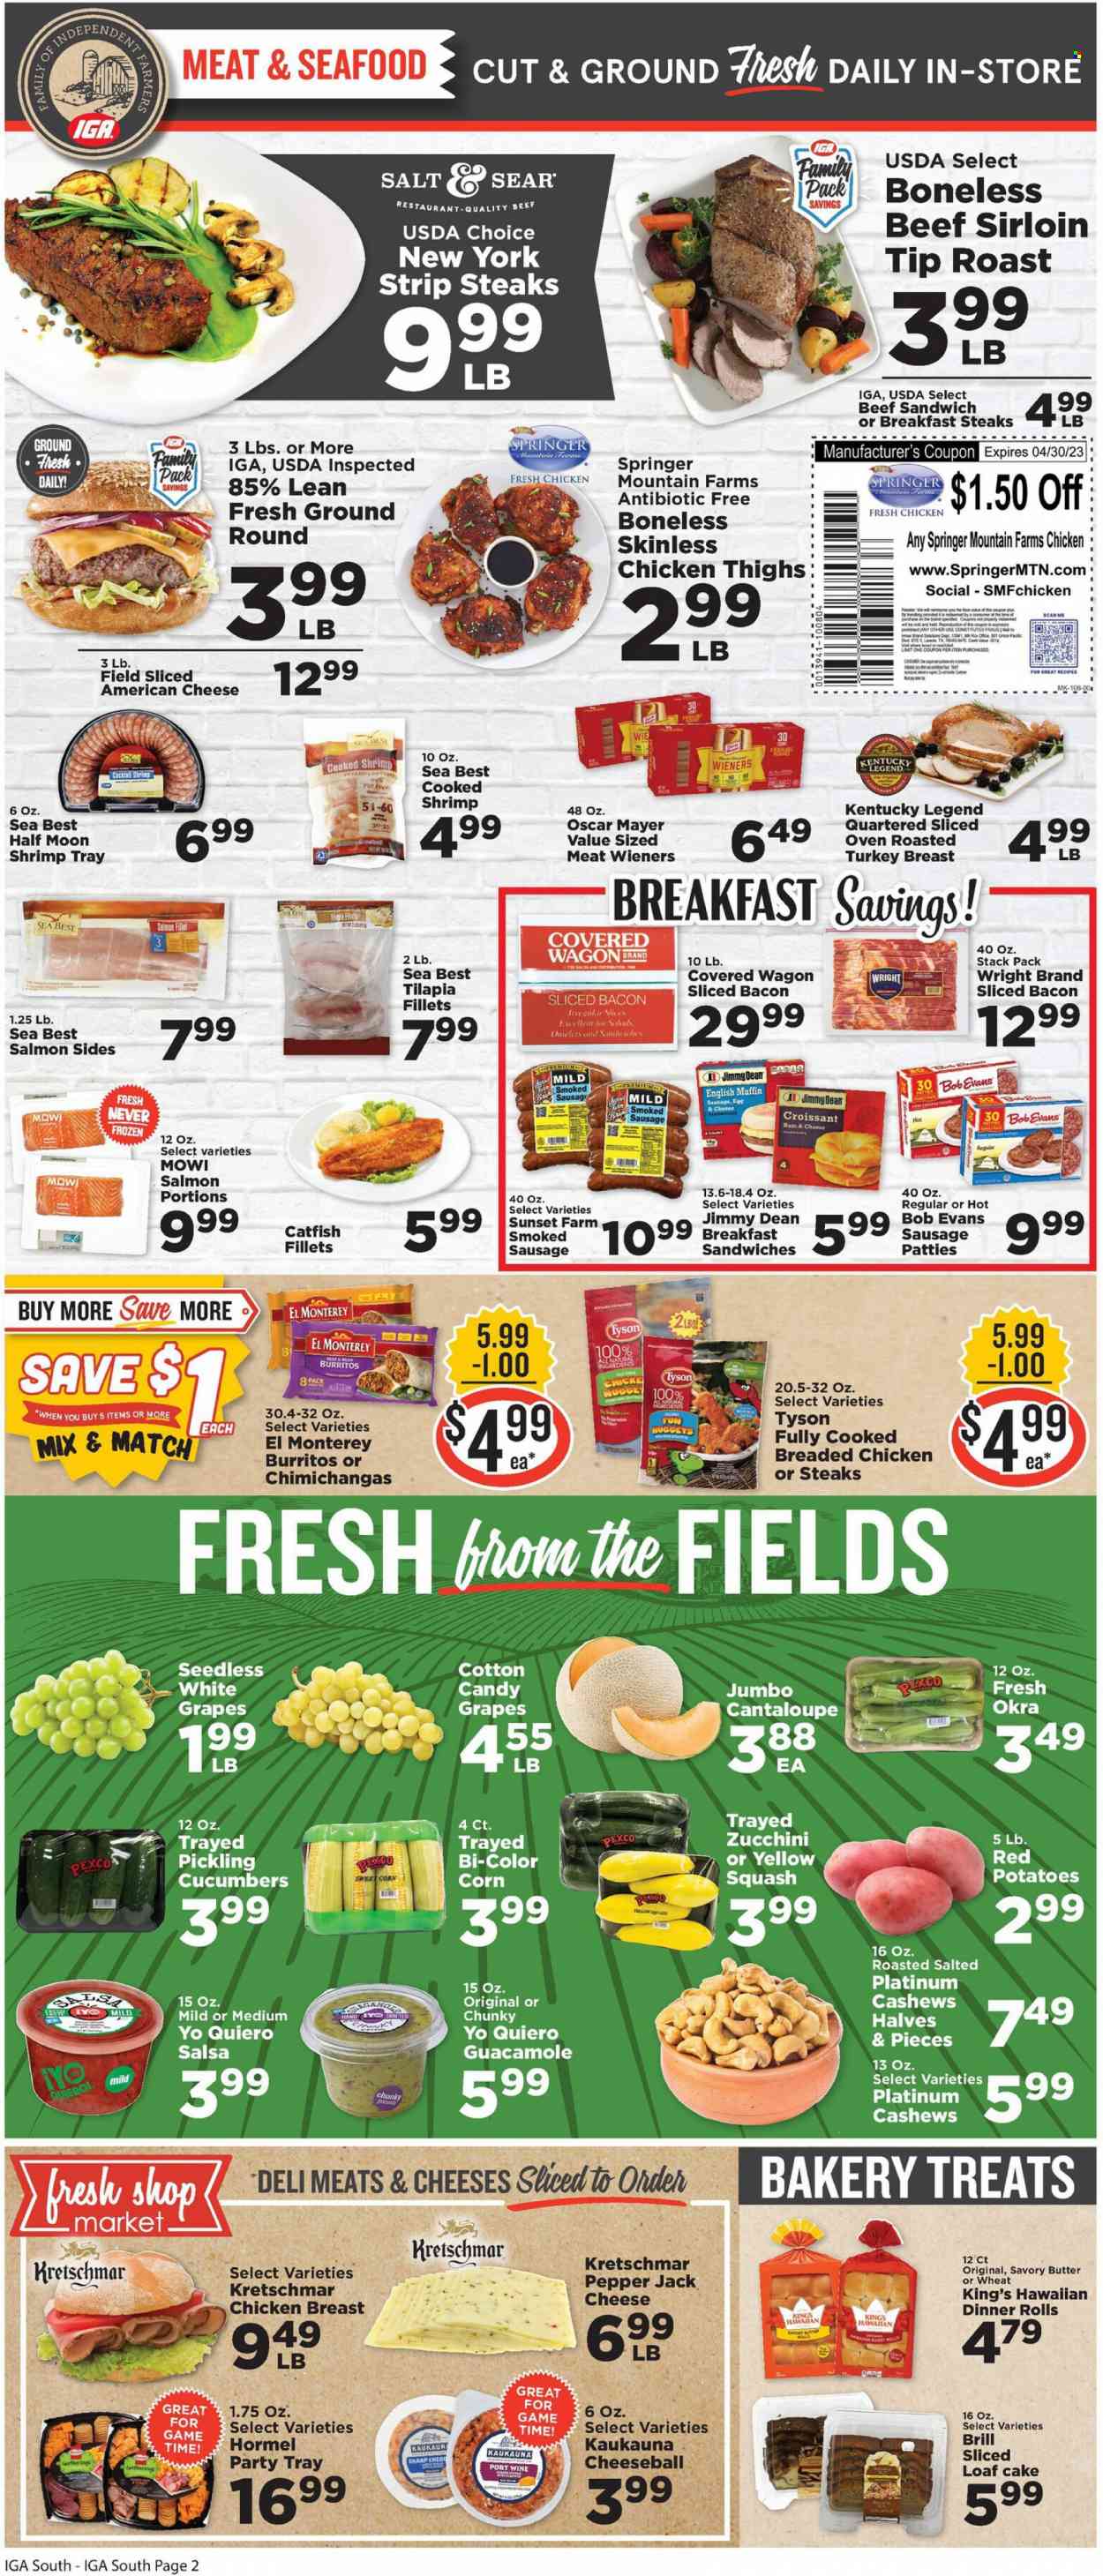 thumbnail - IGA Flyer - 03/22/2023 - 03/28/2023 - Sales products - english muffins, cake, dinner rolls, muffin, loaf cake, cantaloupe, corn, cucumber, zucchini, potatoes, okra, sweet corn, red potatoes, yellow squash, grapes, catfish, tilapia, seafood, shrimps, sandwich, fried chicken, burrito, Bob Evans, Jimmy Dean, Hormel, roast, bacon, Oscar Mayer, sausage, smoked sausage, guacamole, american cheese, Pepper Jack cheese, cheese, cotton candy, salsa, cashews, port wine, chicken breasts, chicken thighs, chicken, beef meat, beef sirloin, steak, striploin steak. Page 2.